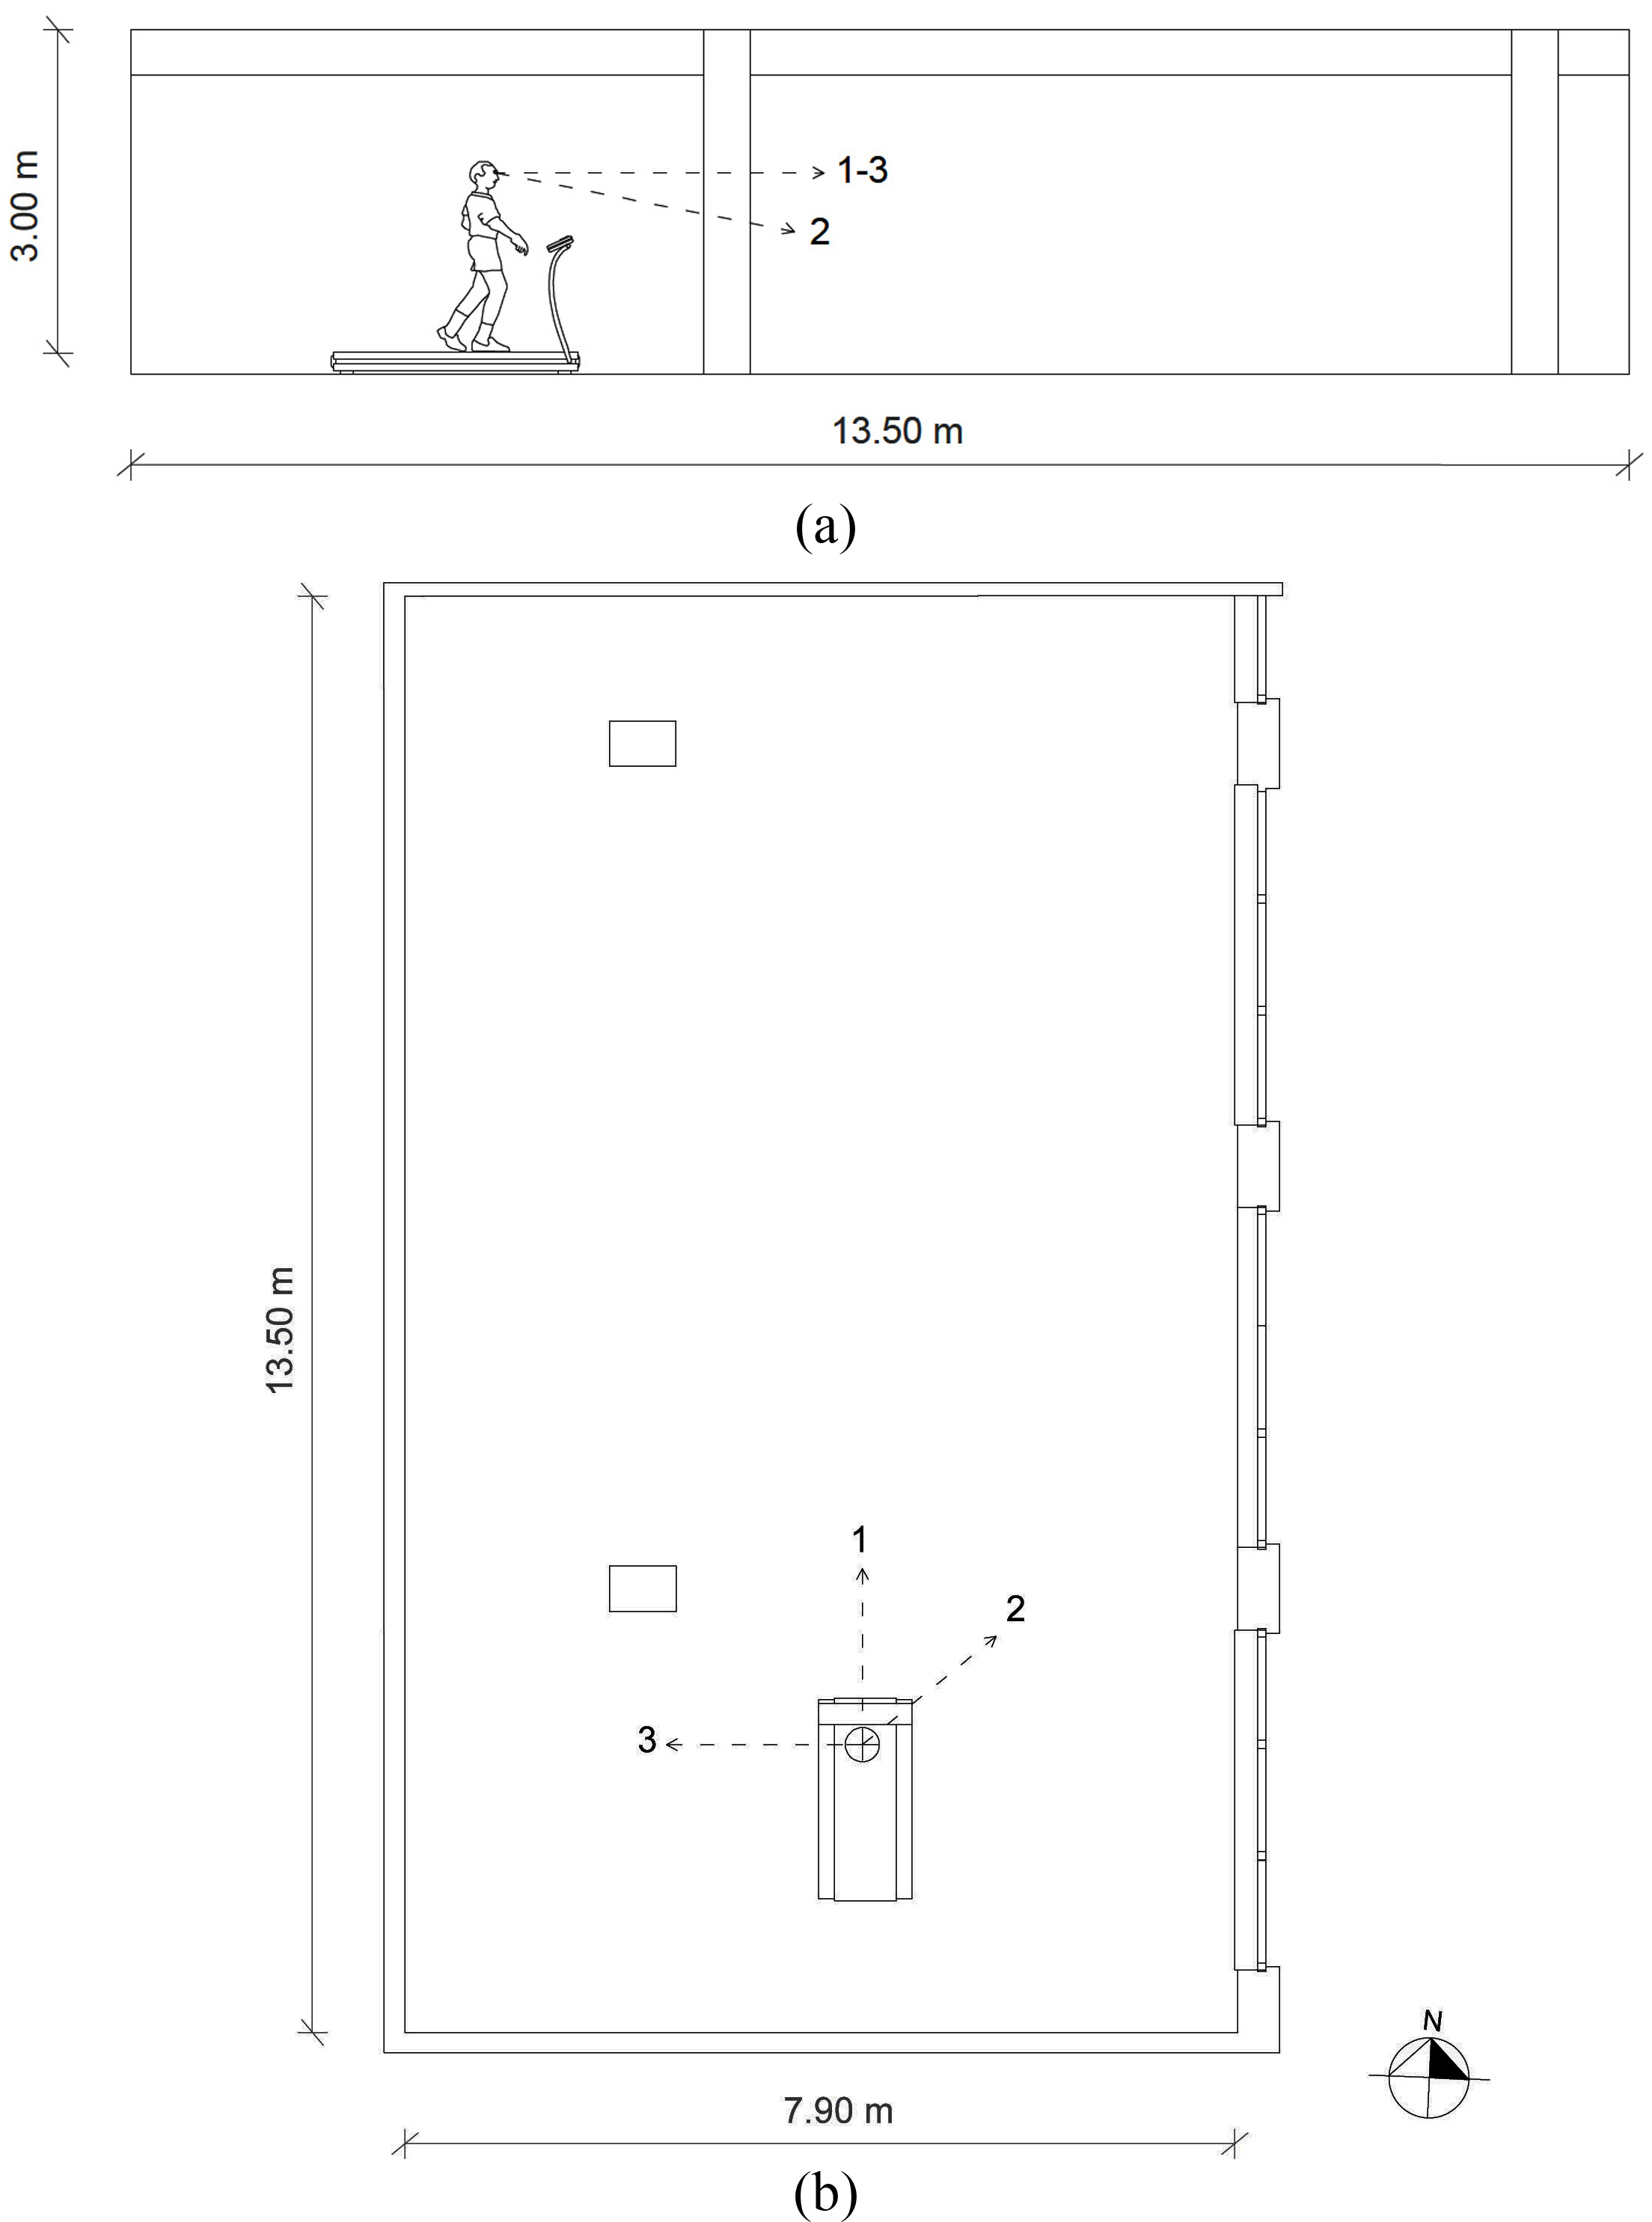 Graphical drawings for Gym room: (a) section and (b) plan with allocation and placement of points of view for camera for simulation output.